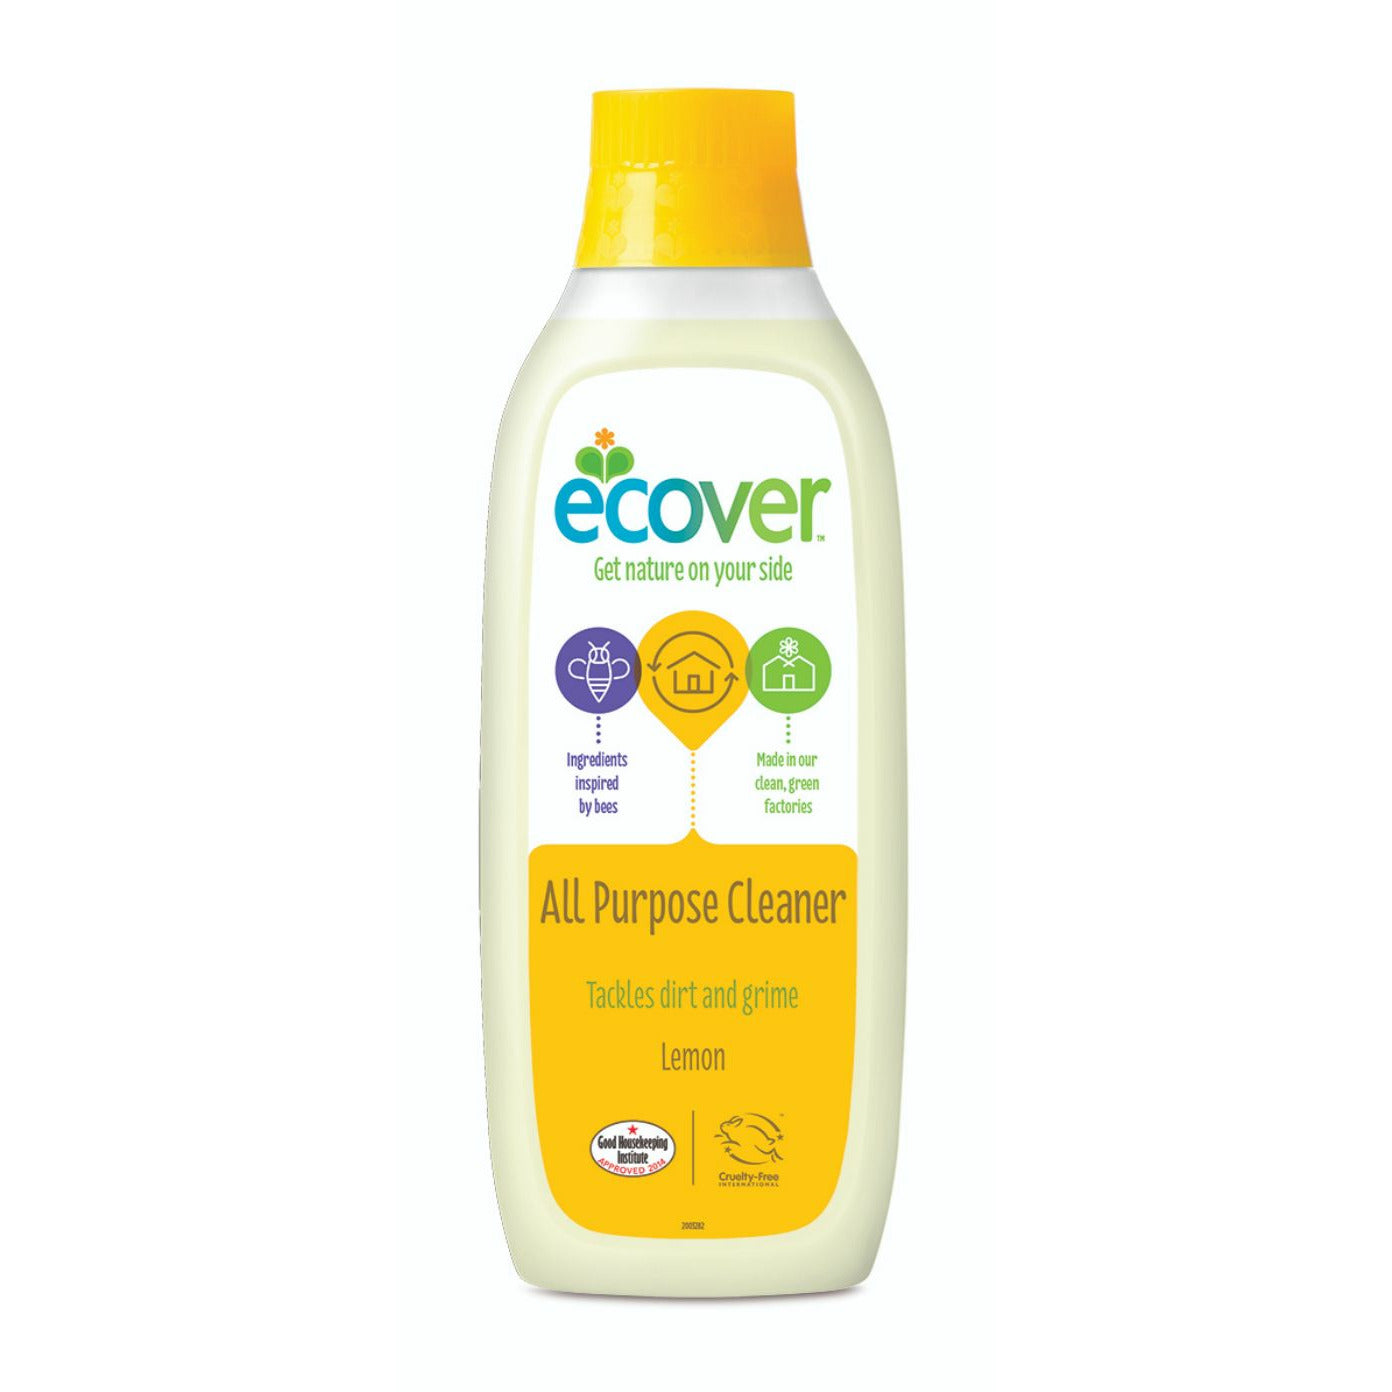 ECOVER CLEANING All Purpose Cleaner                Size - 6x1Ltr